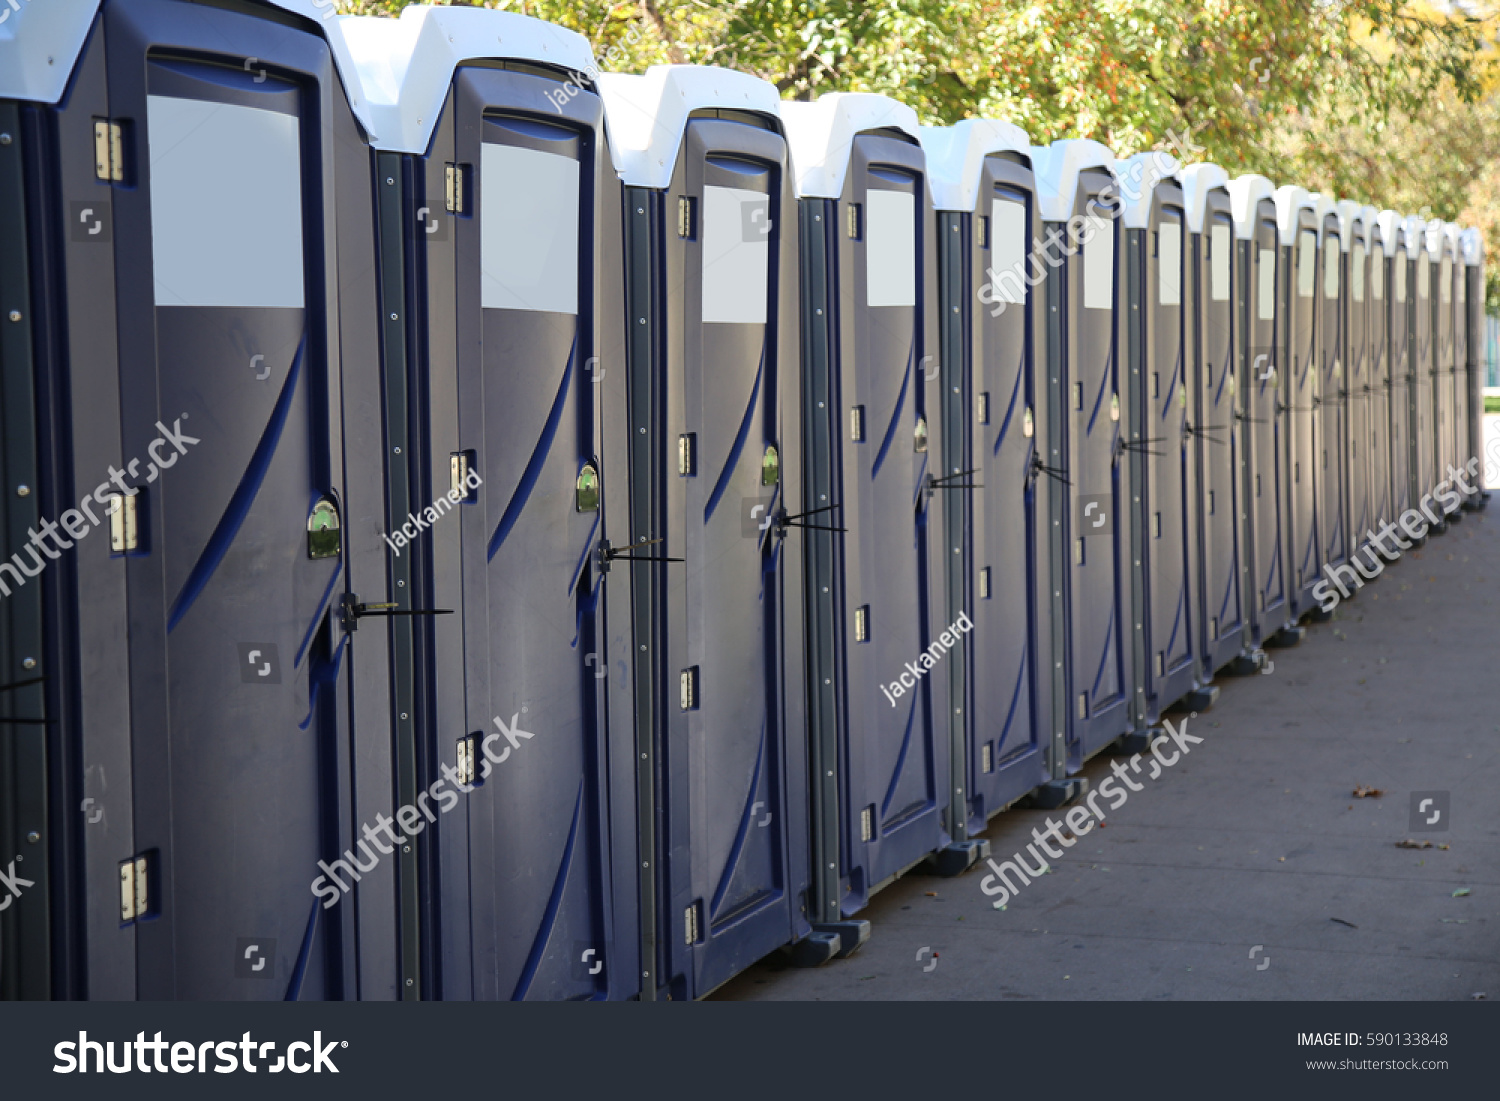 Row of portable toilets on a city street #590133848